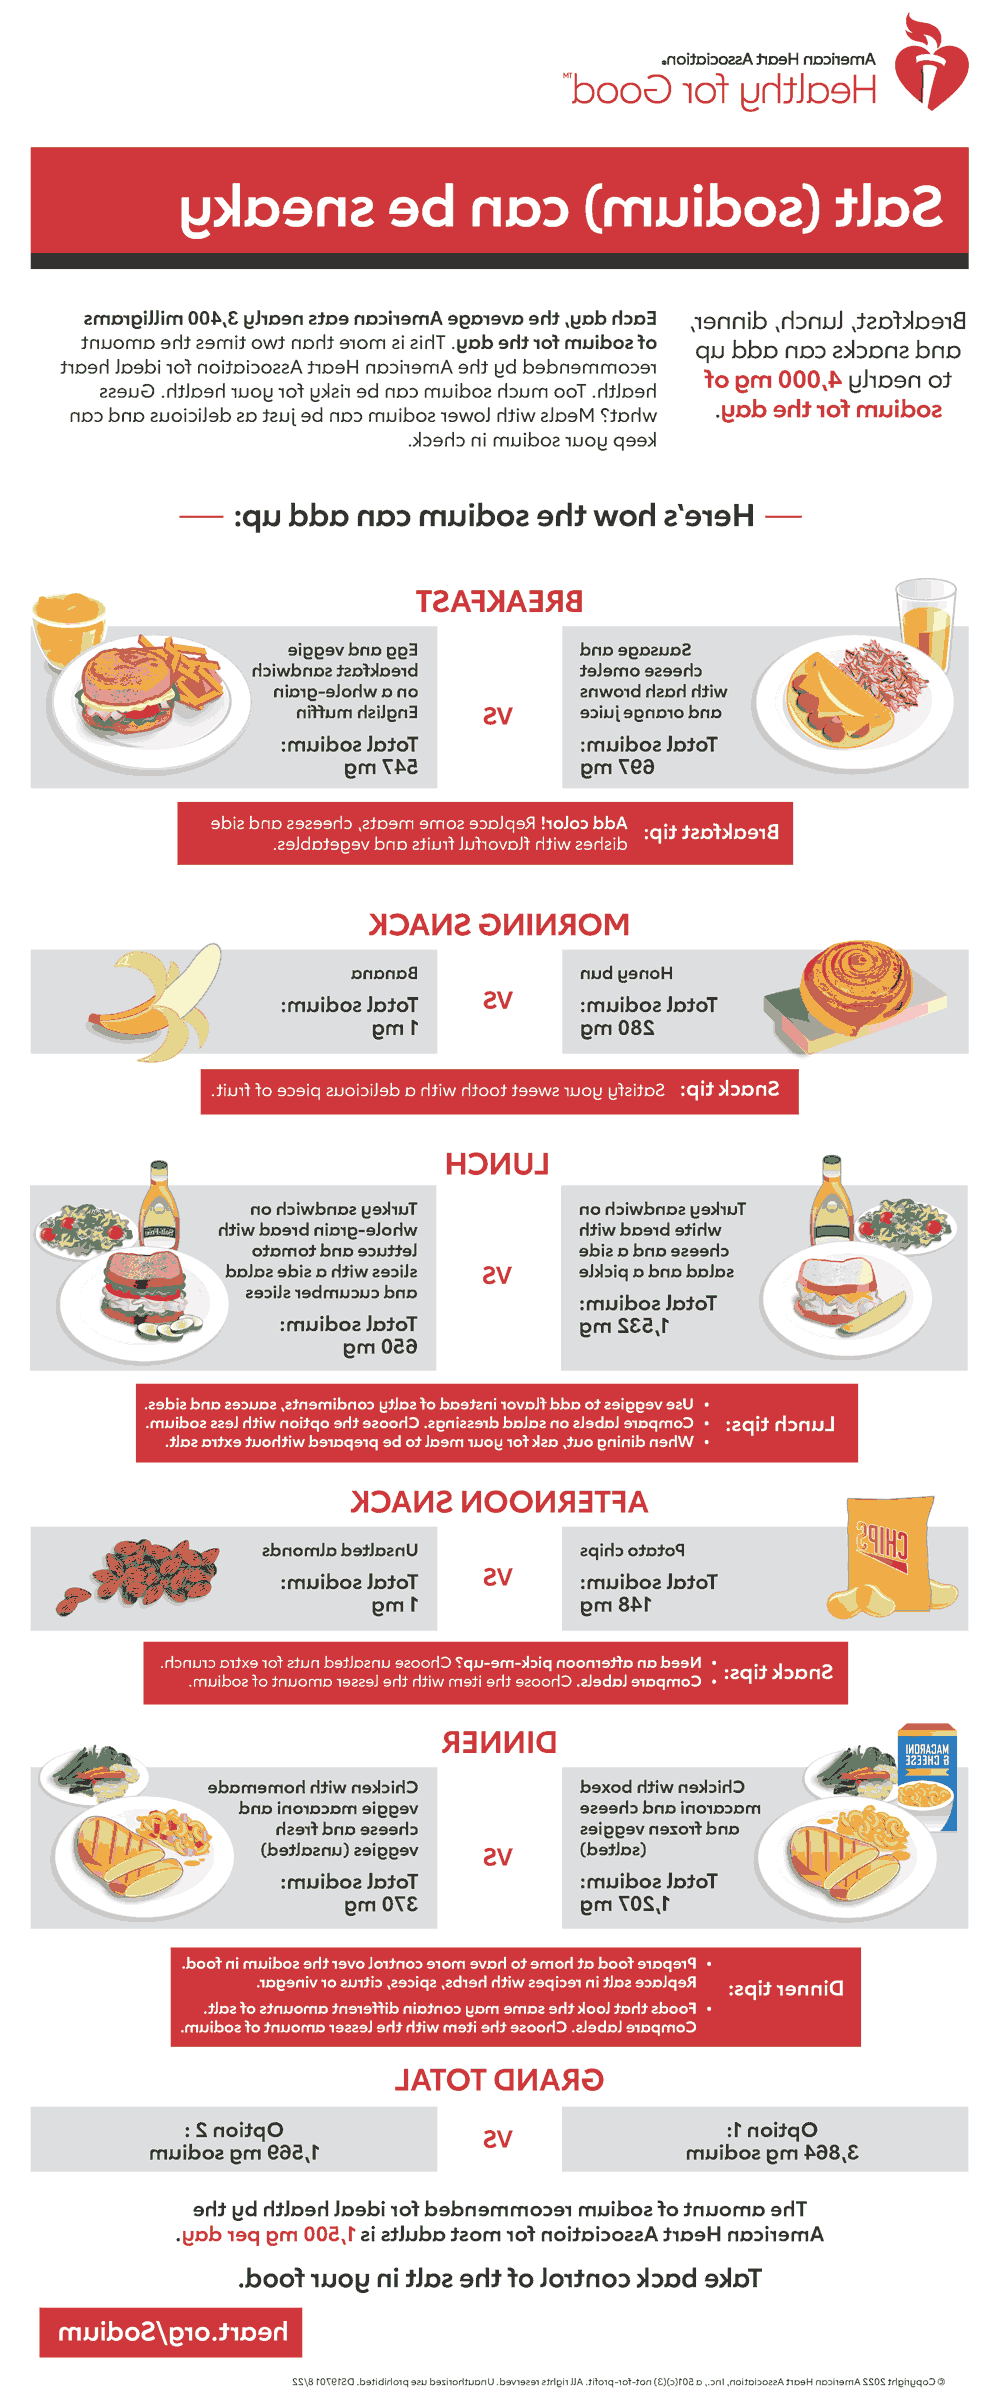 Sodium Can be Sneaky Infographic